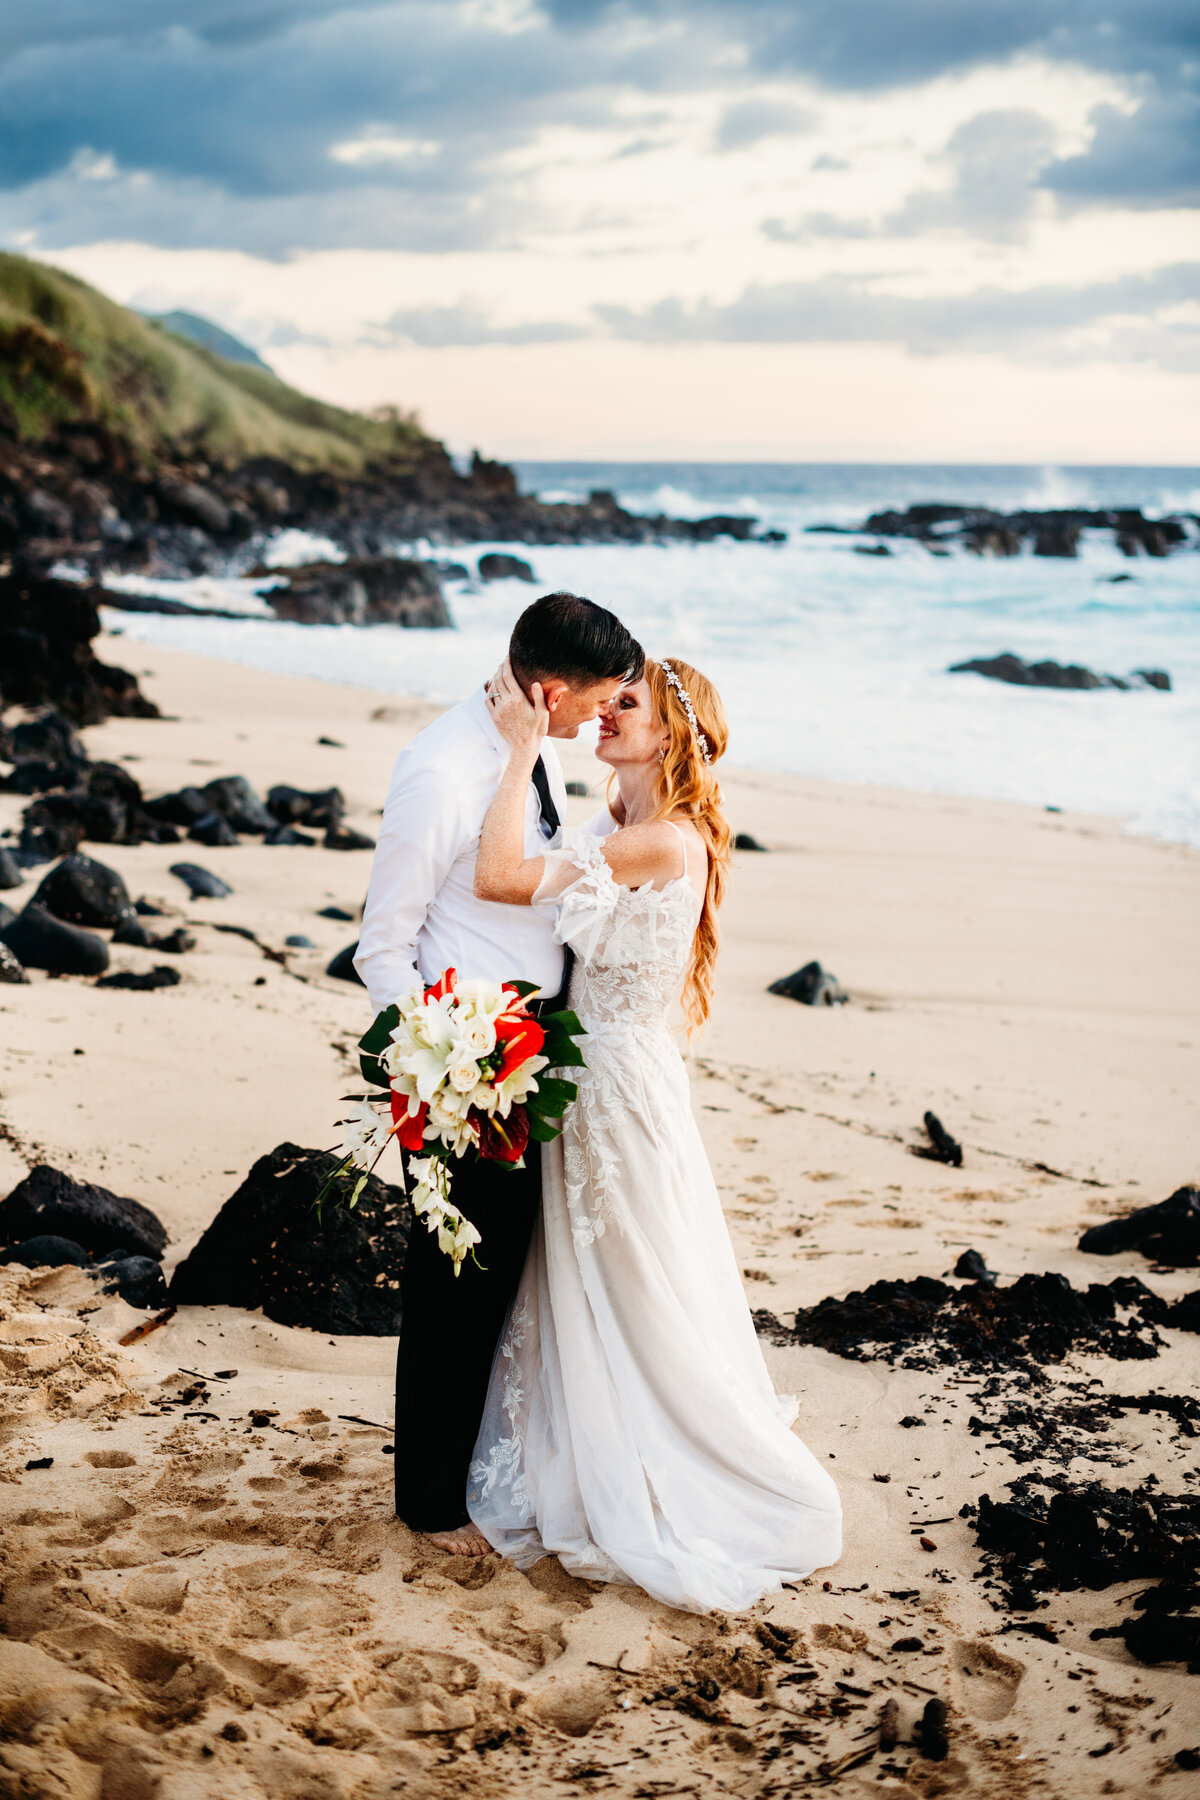 Bride and groom going in for a kiss on the beach